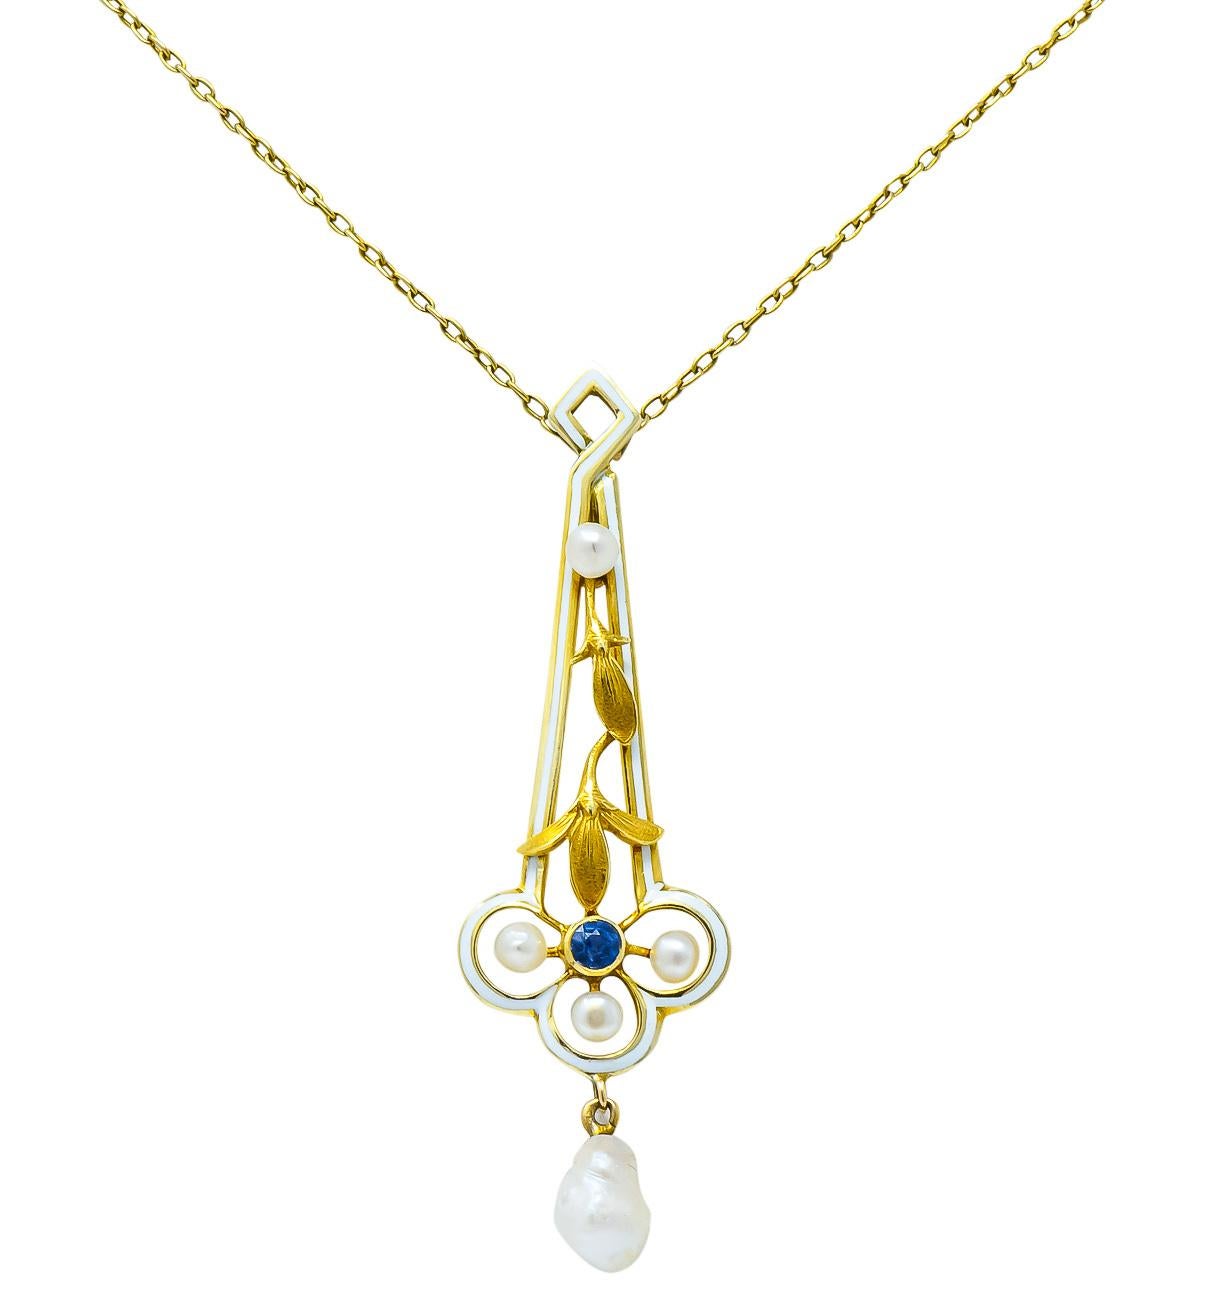 Drop designed with a geometric top, clover bottom, and textured gold foliate motif

Surrounded by white enamel with no loss, consistent with age, wear, and use

Accented with four round natural pearls and a dogtooth pearl drop, very well